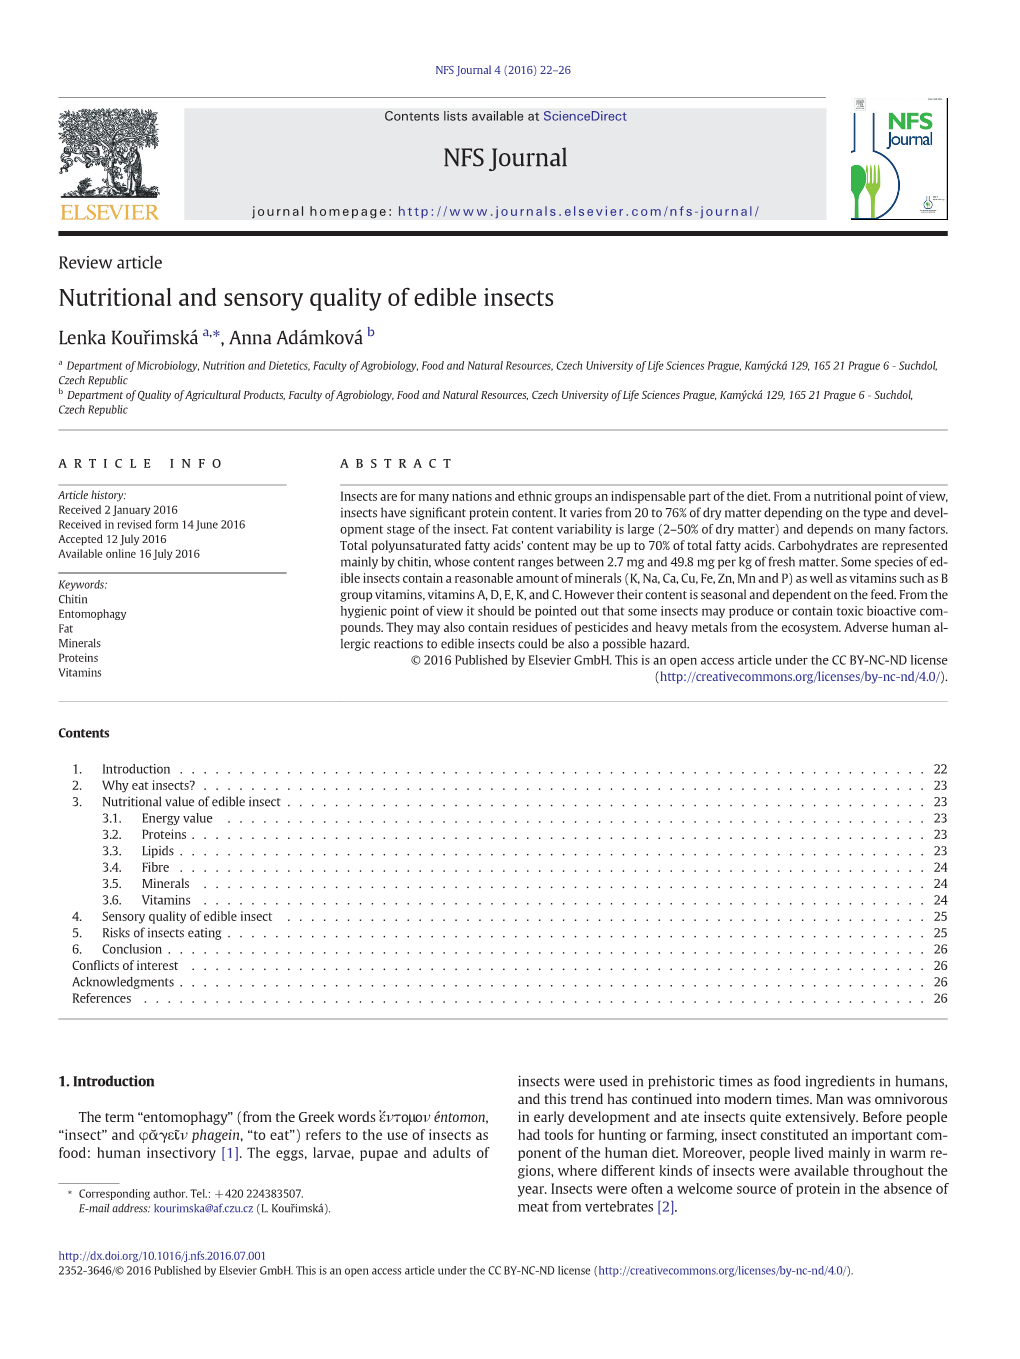 Nutritional and Sensory Quality of Edible Insects